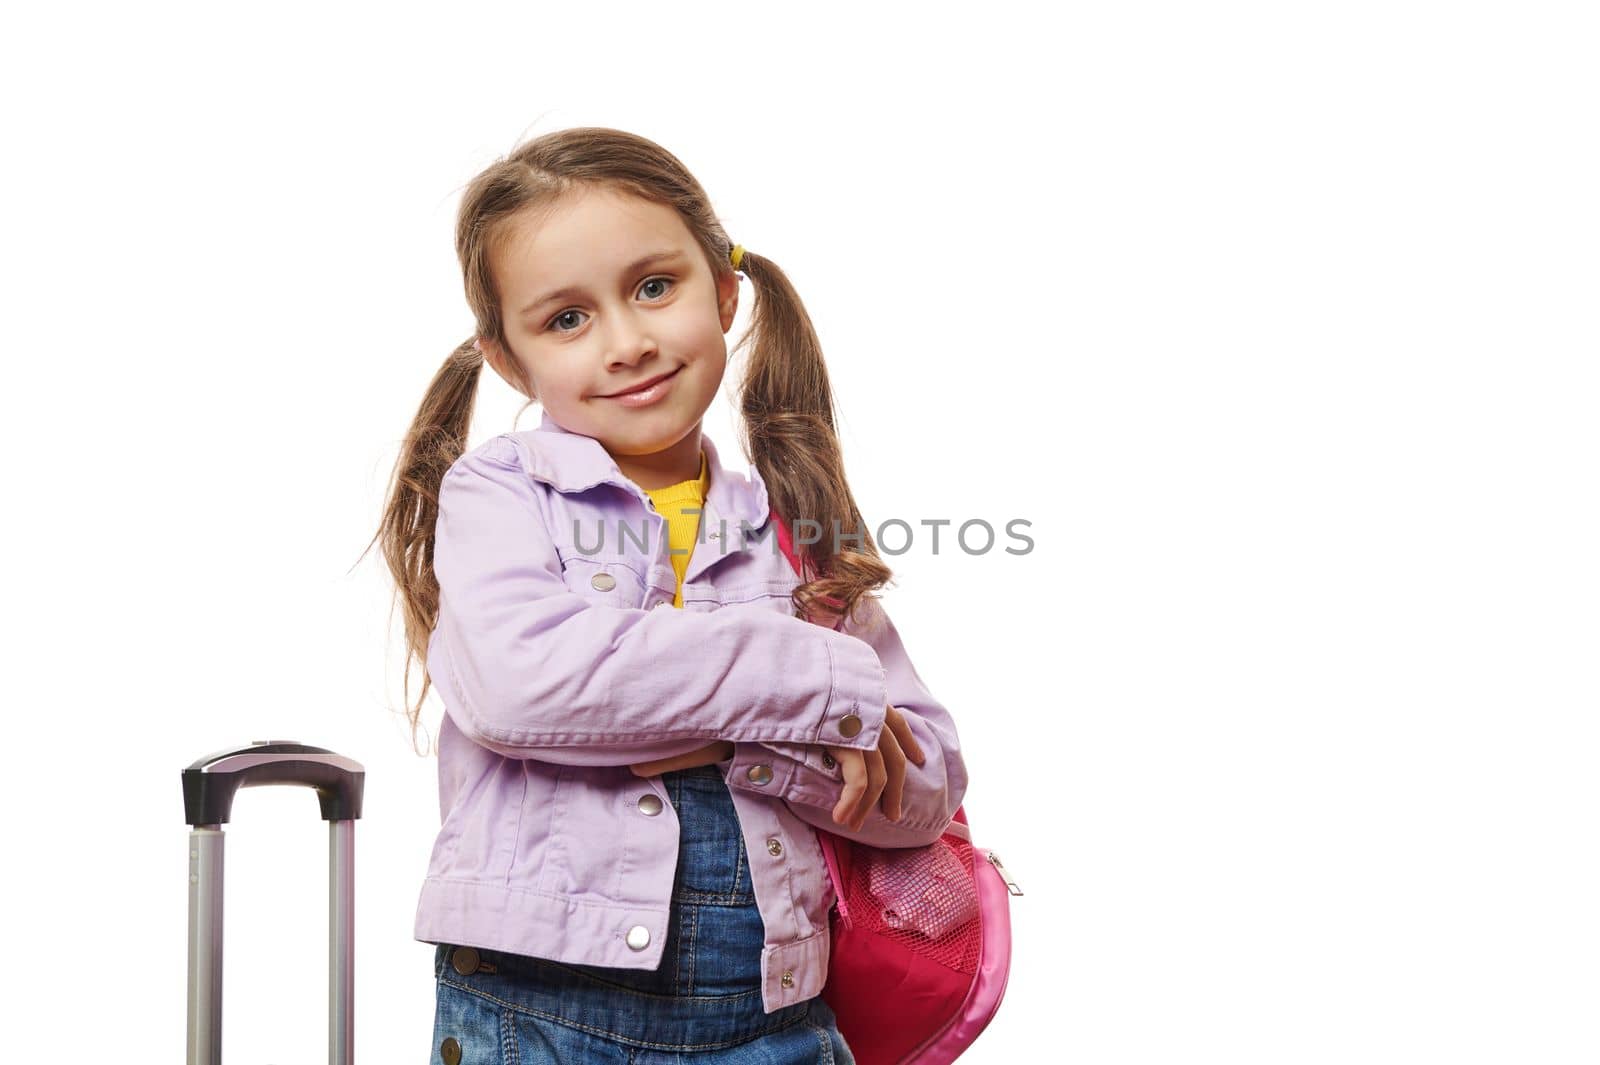 Preschooler lovely little girl with two ponytails, posing with pink backpack and suitcase over white background. Travel by artgf